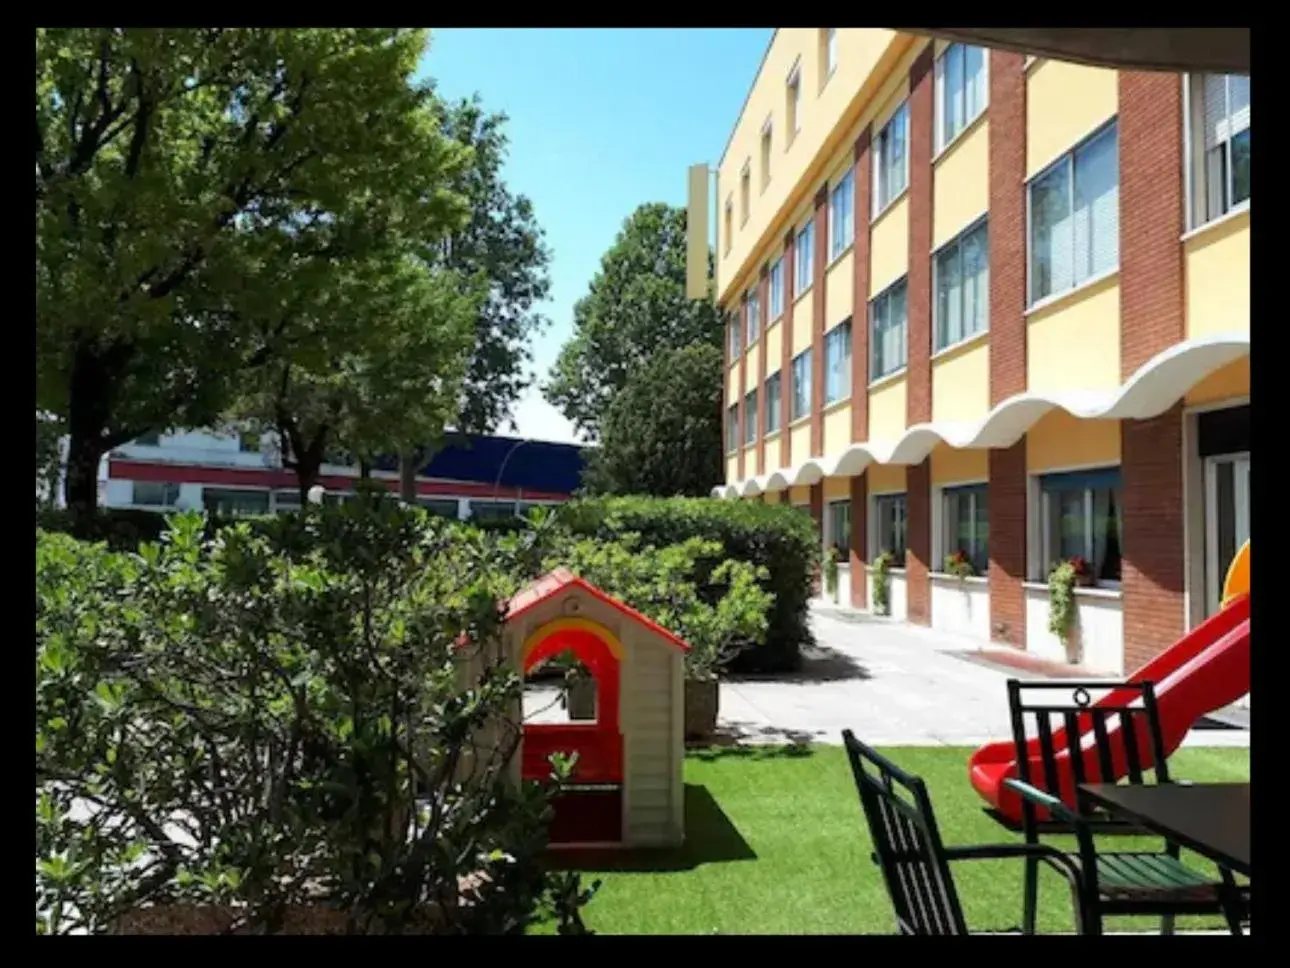 Property building, Children's Play Area in Euromotel Croce Bianca